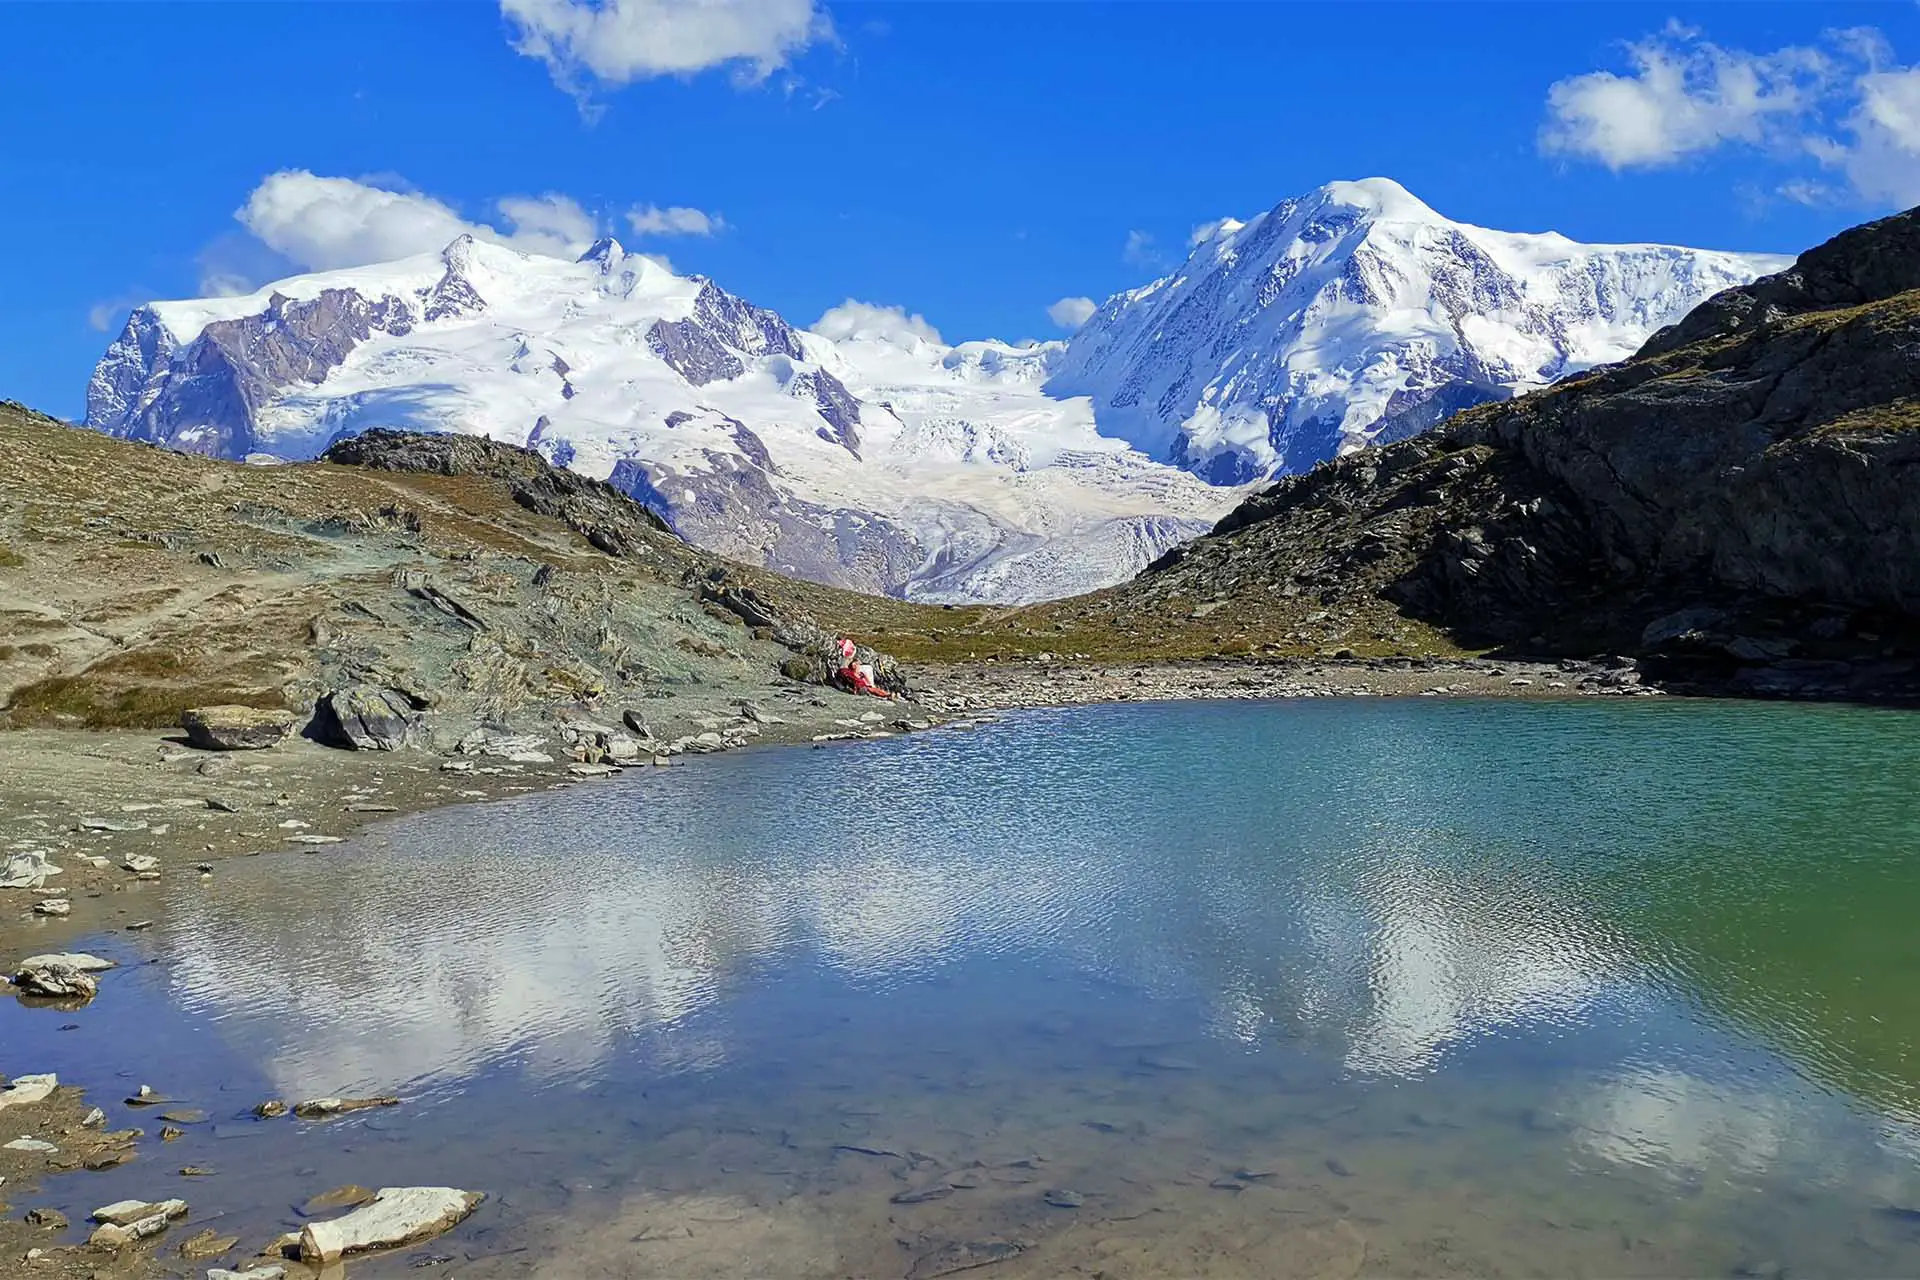 Lake Riffelsee is one of the most famous lakes in Zermatt.